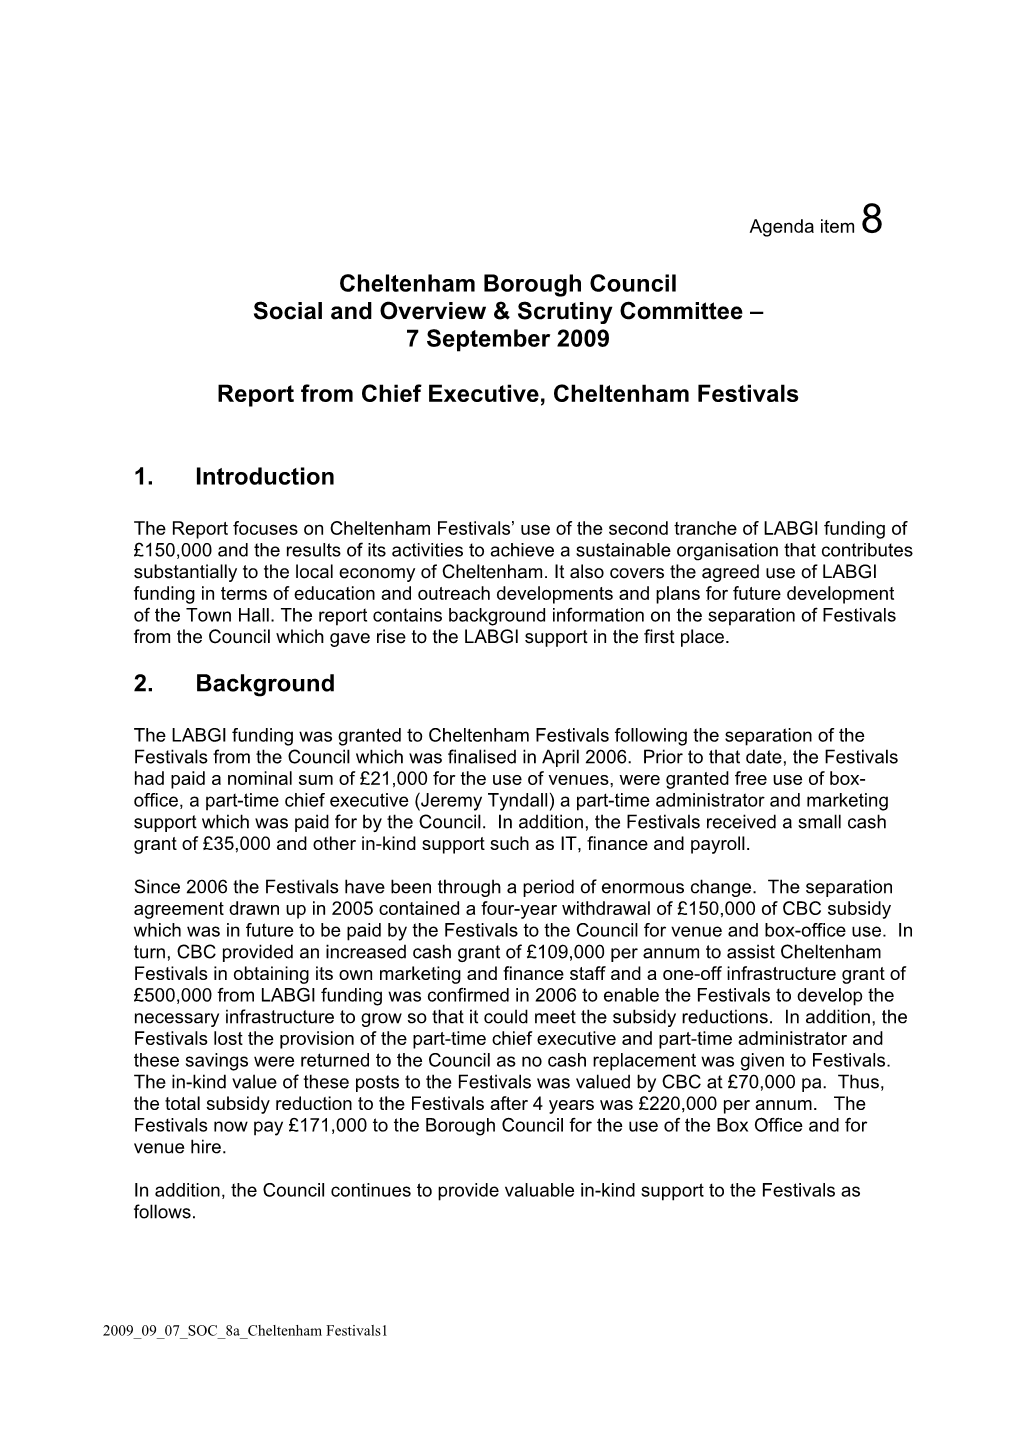 Cheltenham Borough Council Social and Overview & Scrutiny Committee – 7 September 2009